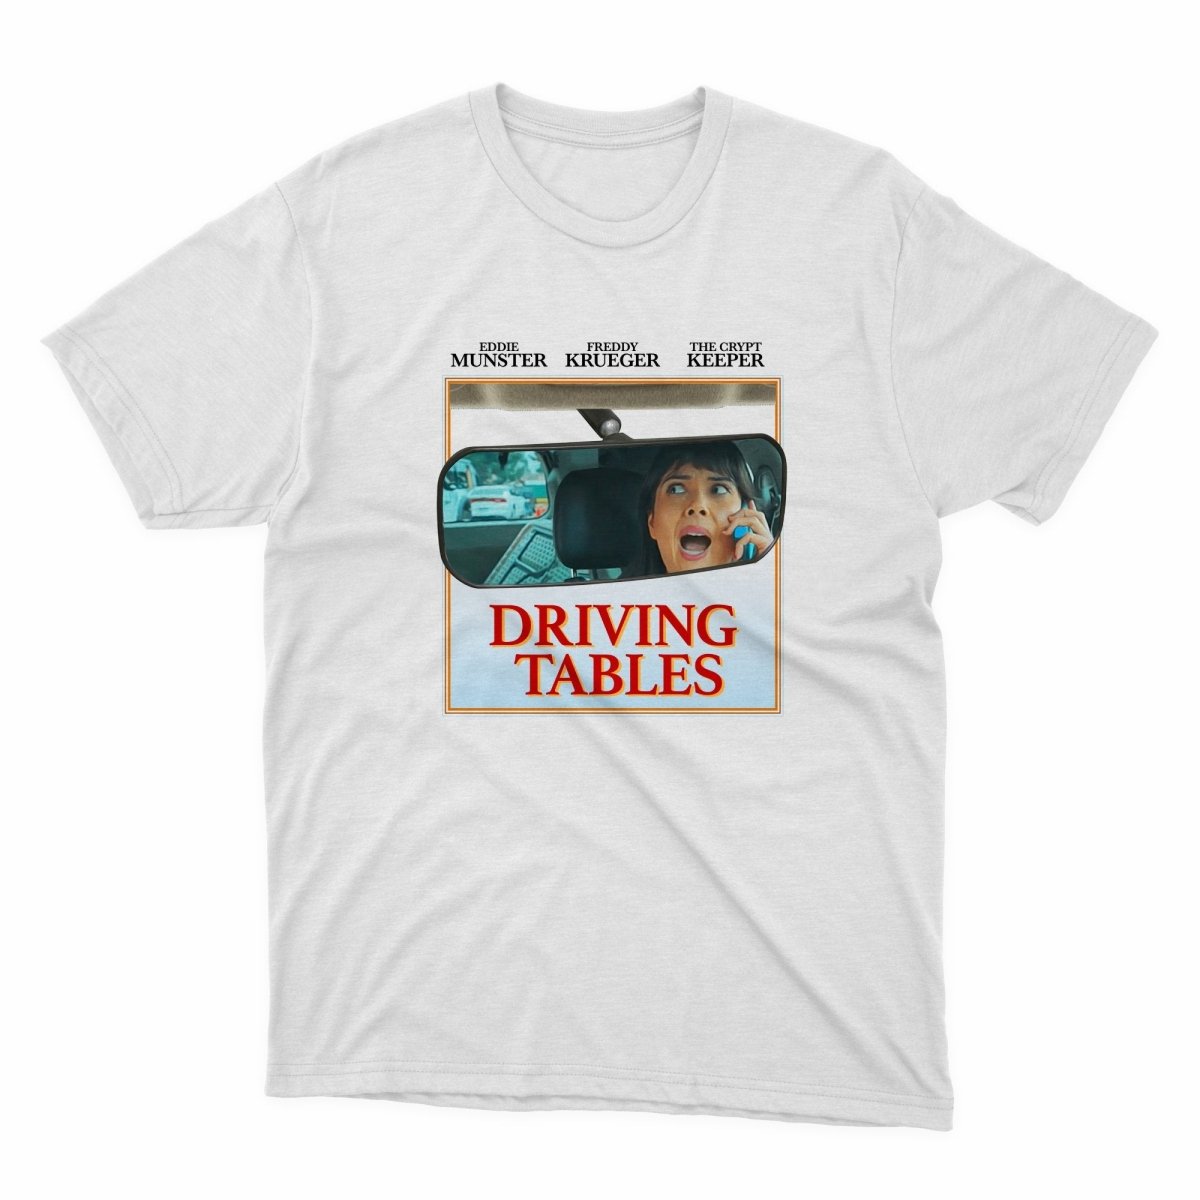 I Think You Should Leave Driving Tables Shirt - stickerbullI Think You Should Leave Driving Tables ShirtShirtsPrintifystickerbull52614849900073984043WhiteSa white t - shirt with a movie poster on it